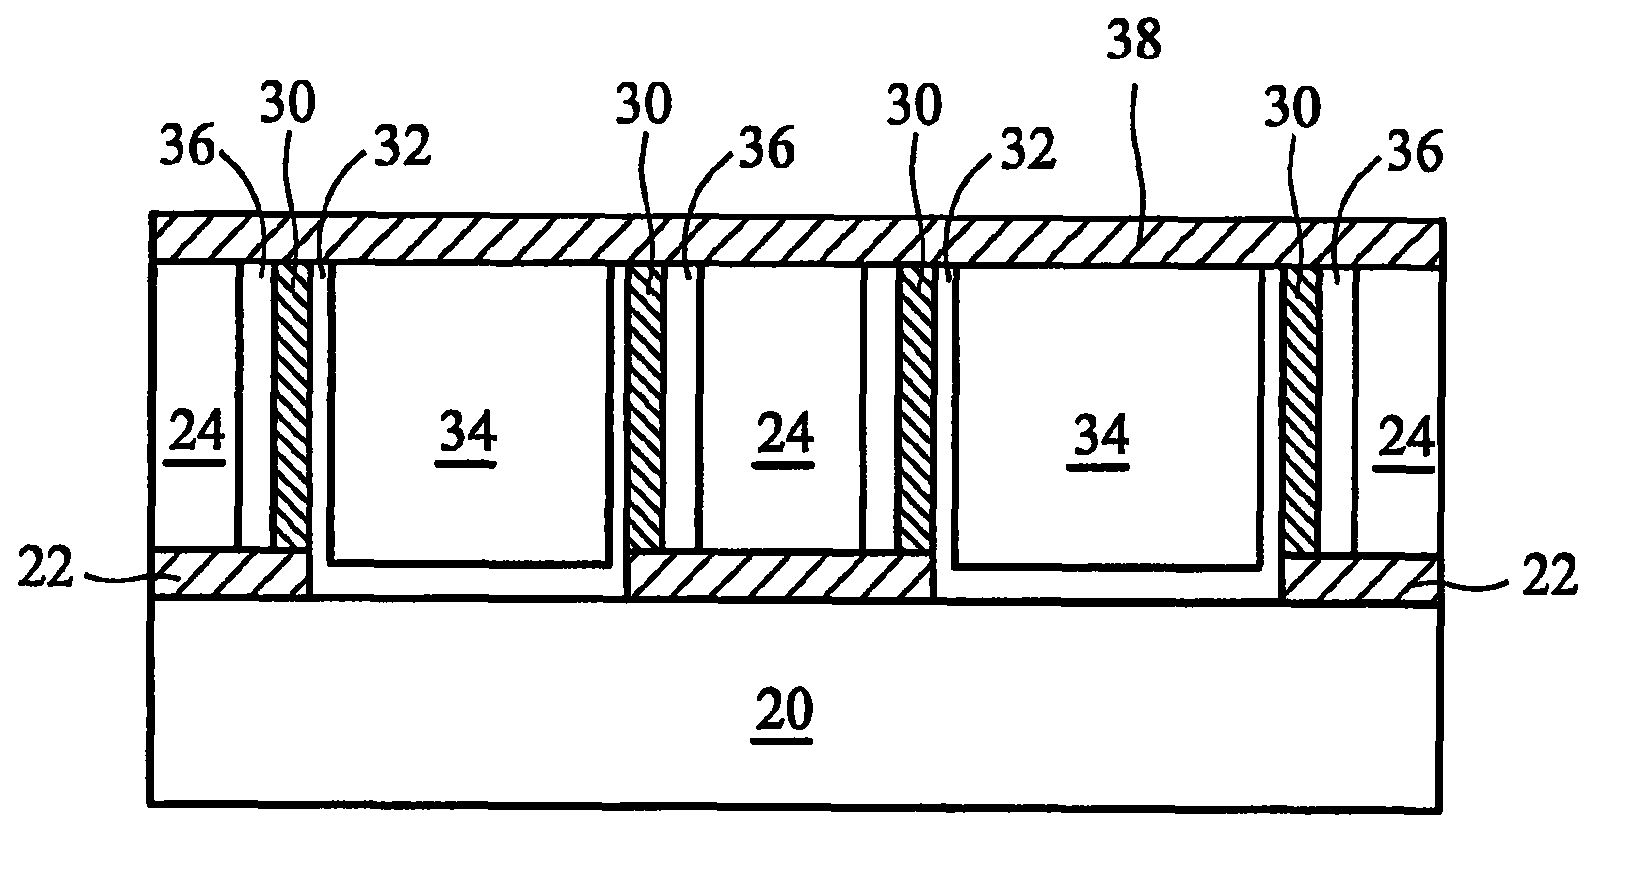 Self-aligned air-gap in interconnect structures